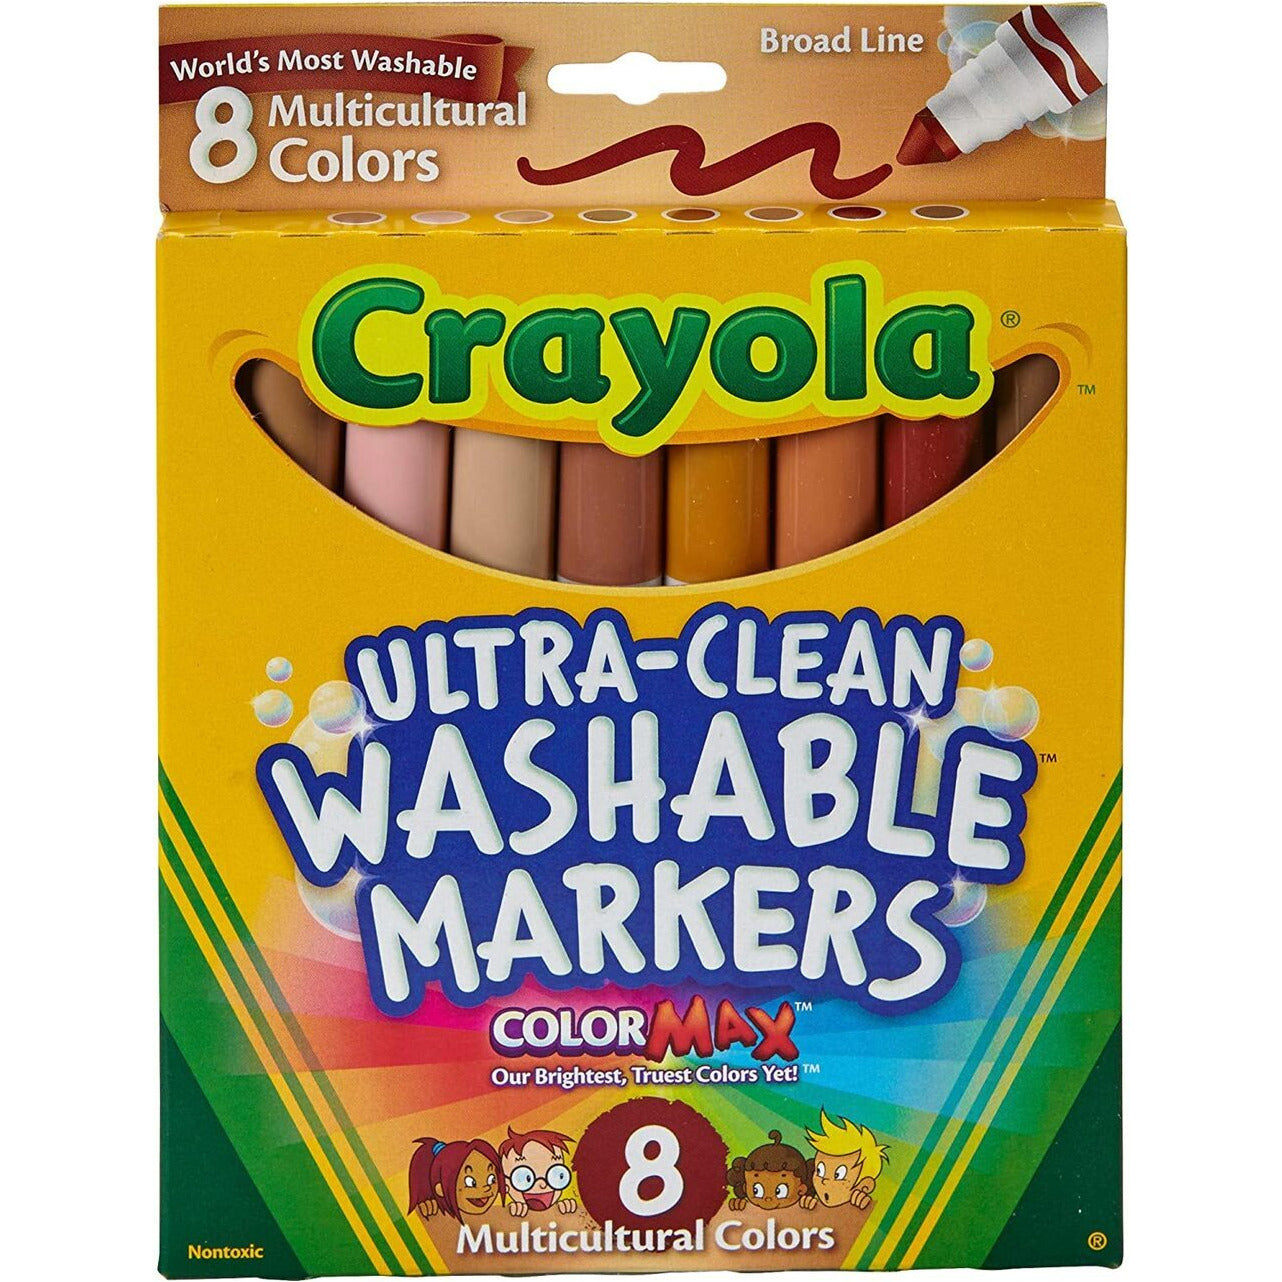 Crayola Ultra-Clean Washable Markers - Multicultural Colors - 8 Markers